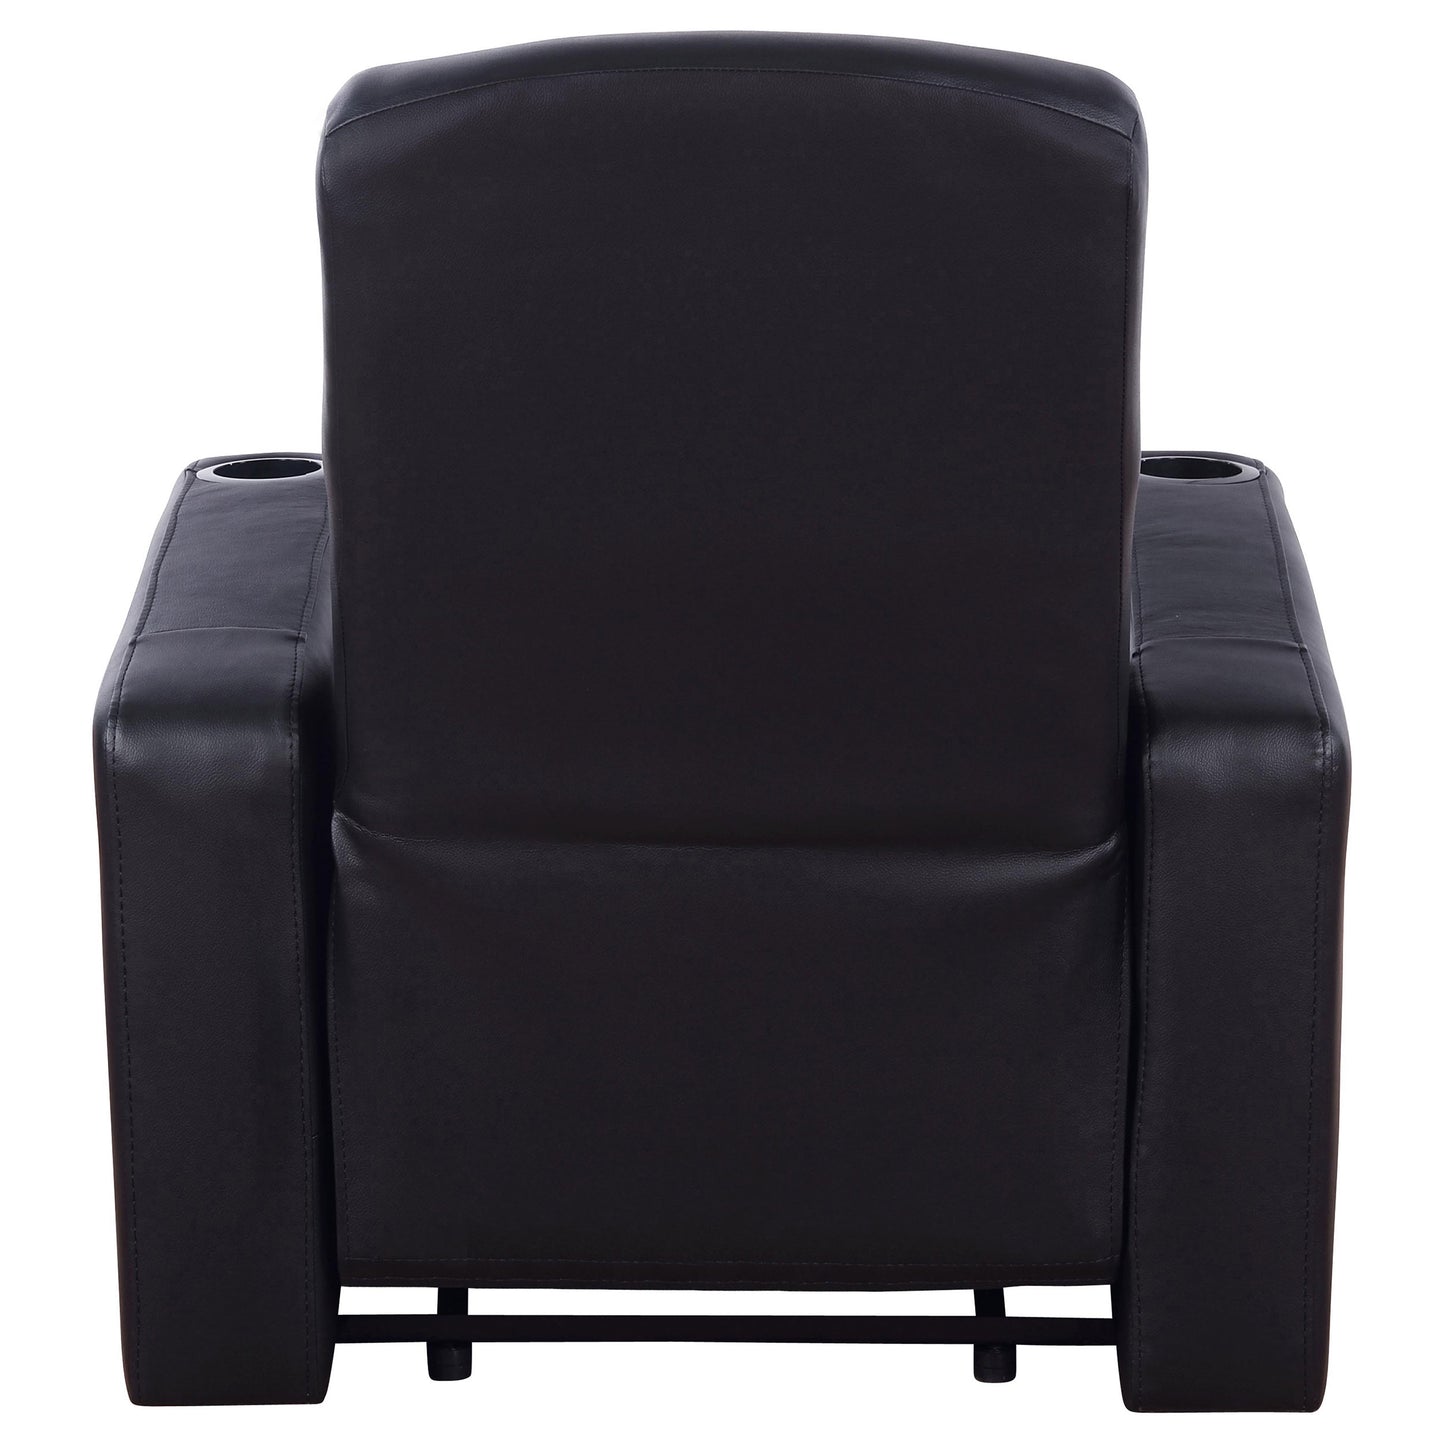 Cyrus Home Theater Upholstered Recliner Black